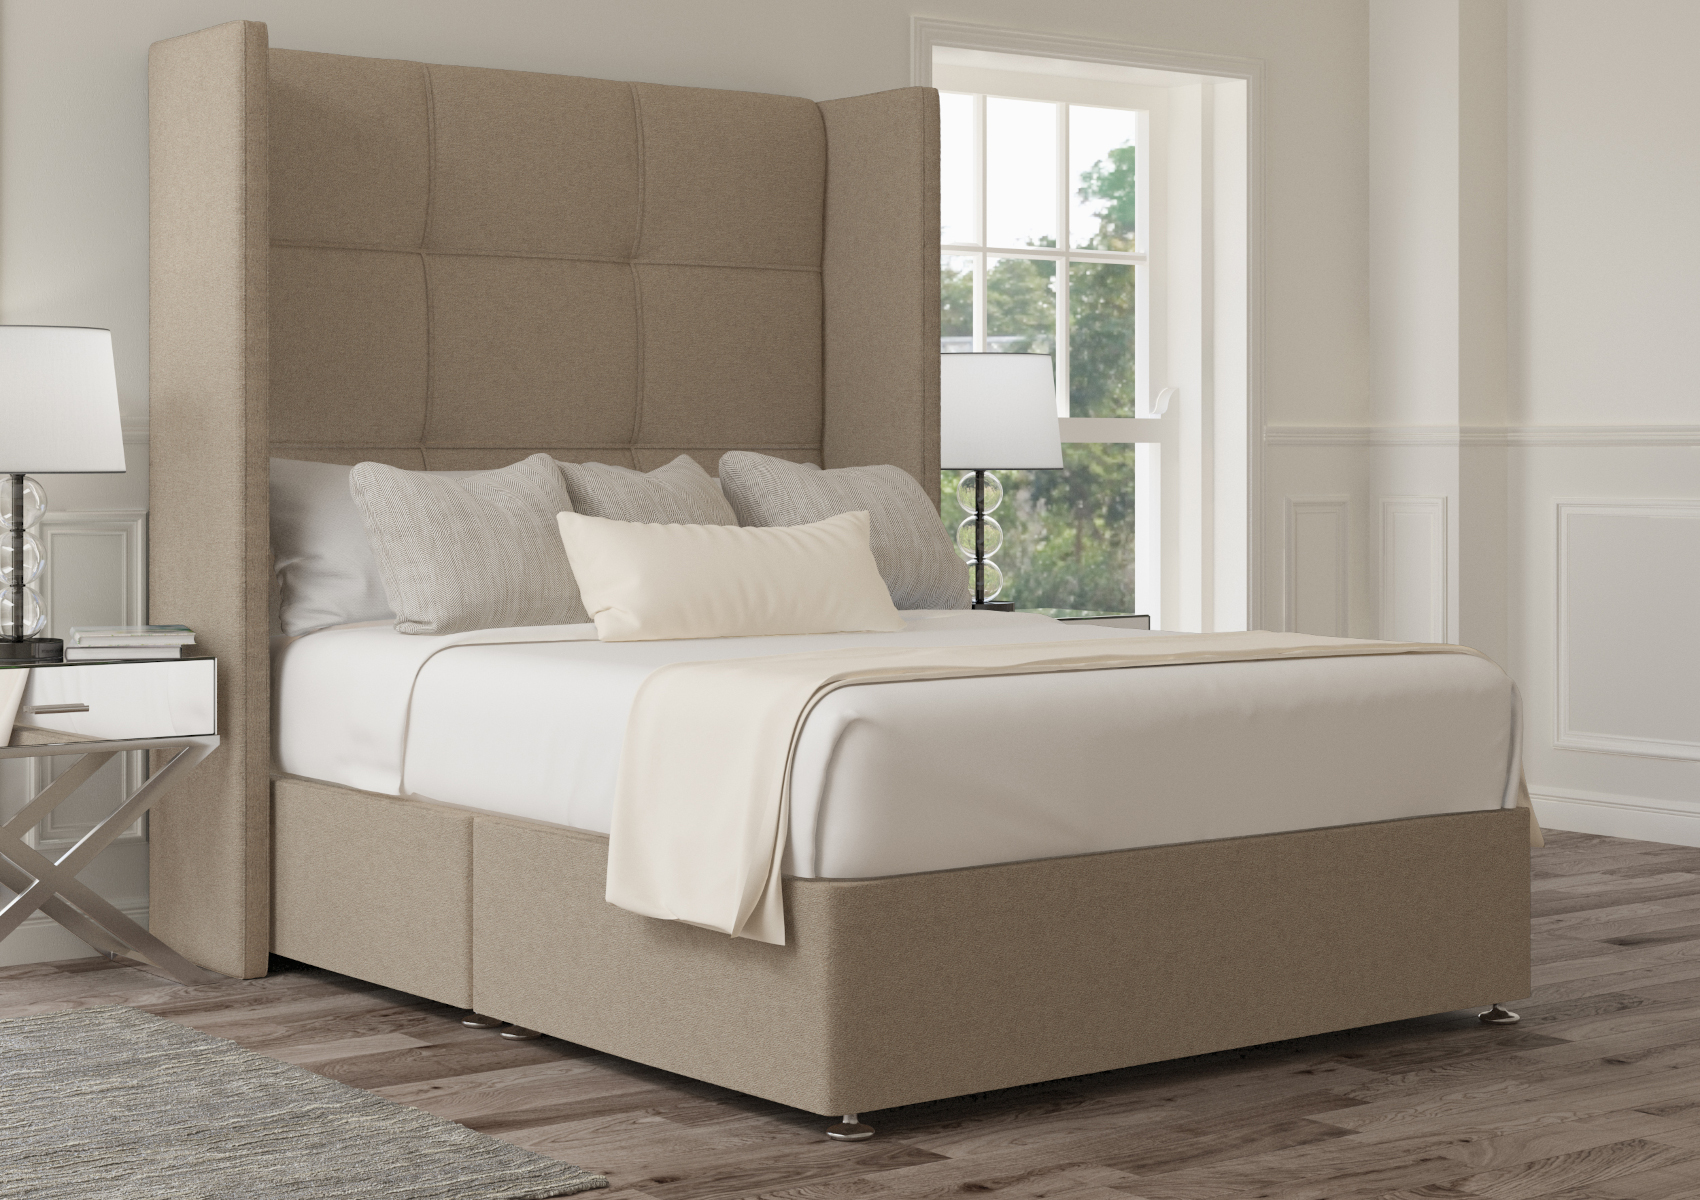 View Oaklyn Gouache Eau De Nil Upholstered King Size Winged Bed Time4Sleep information